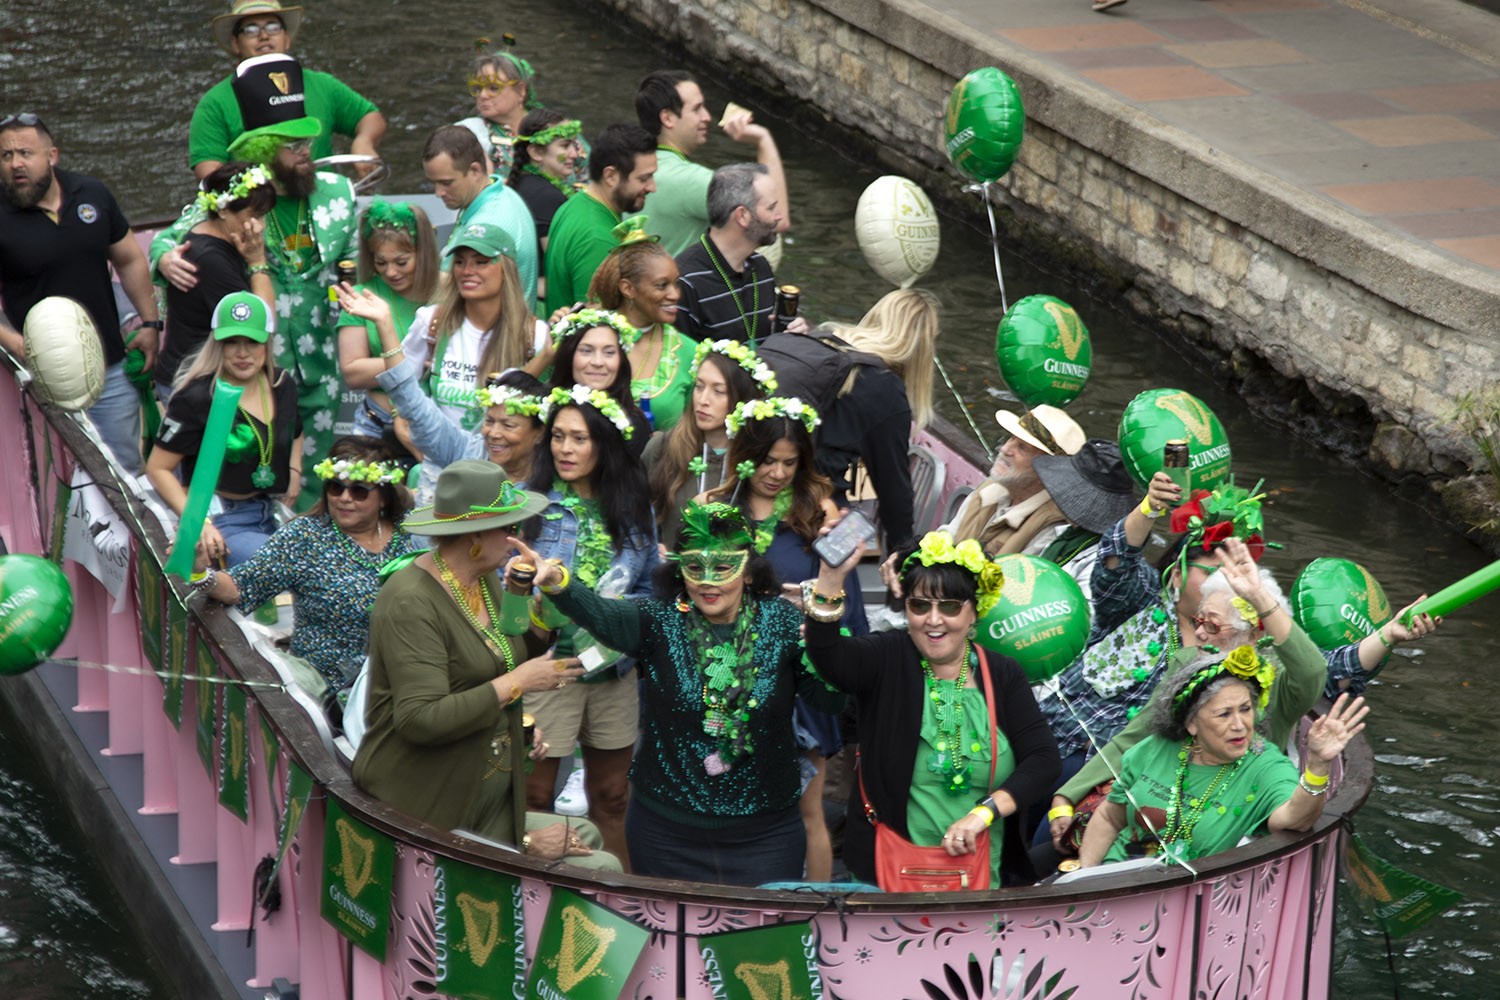 Thousands of people gather along the River Walk on St. Patrick's Day, March 17, 2022, for the annual dyeing of the San Antonio River. Photo by Ben Olivo | Heron